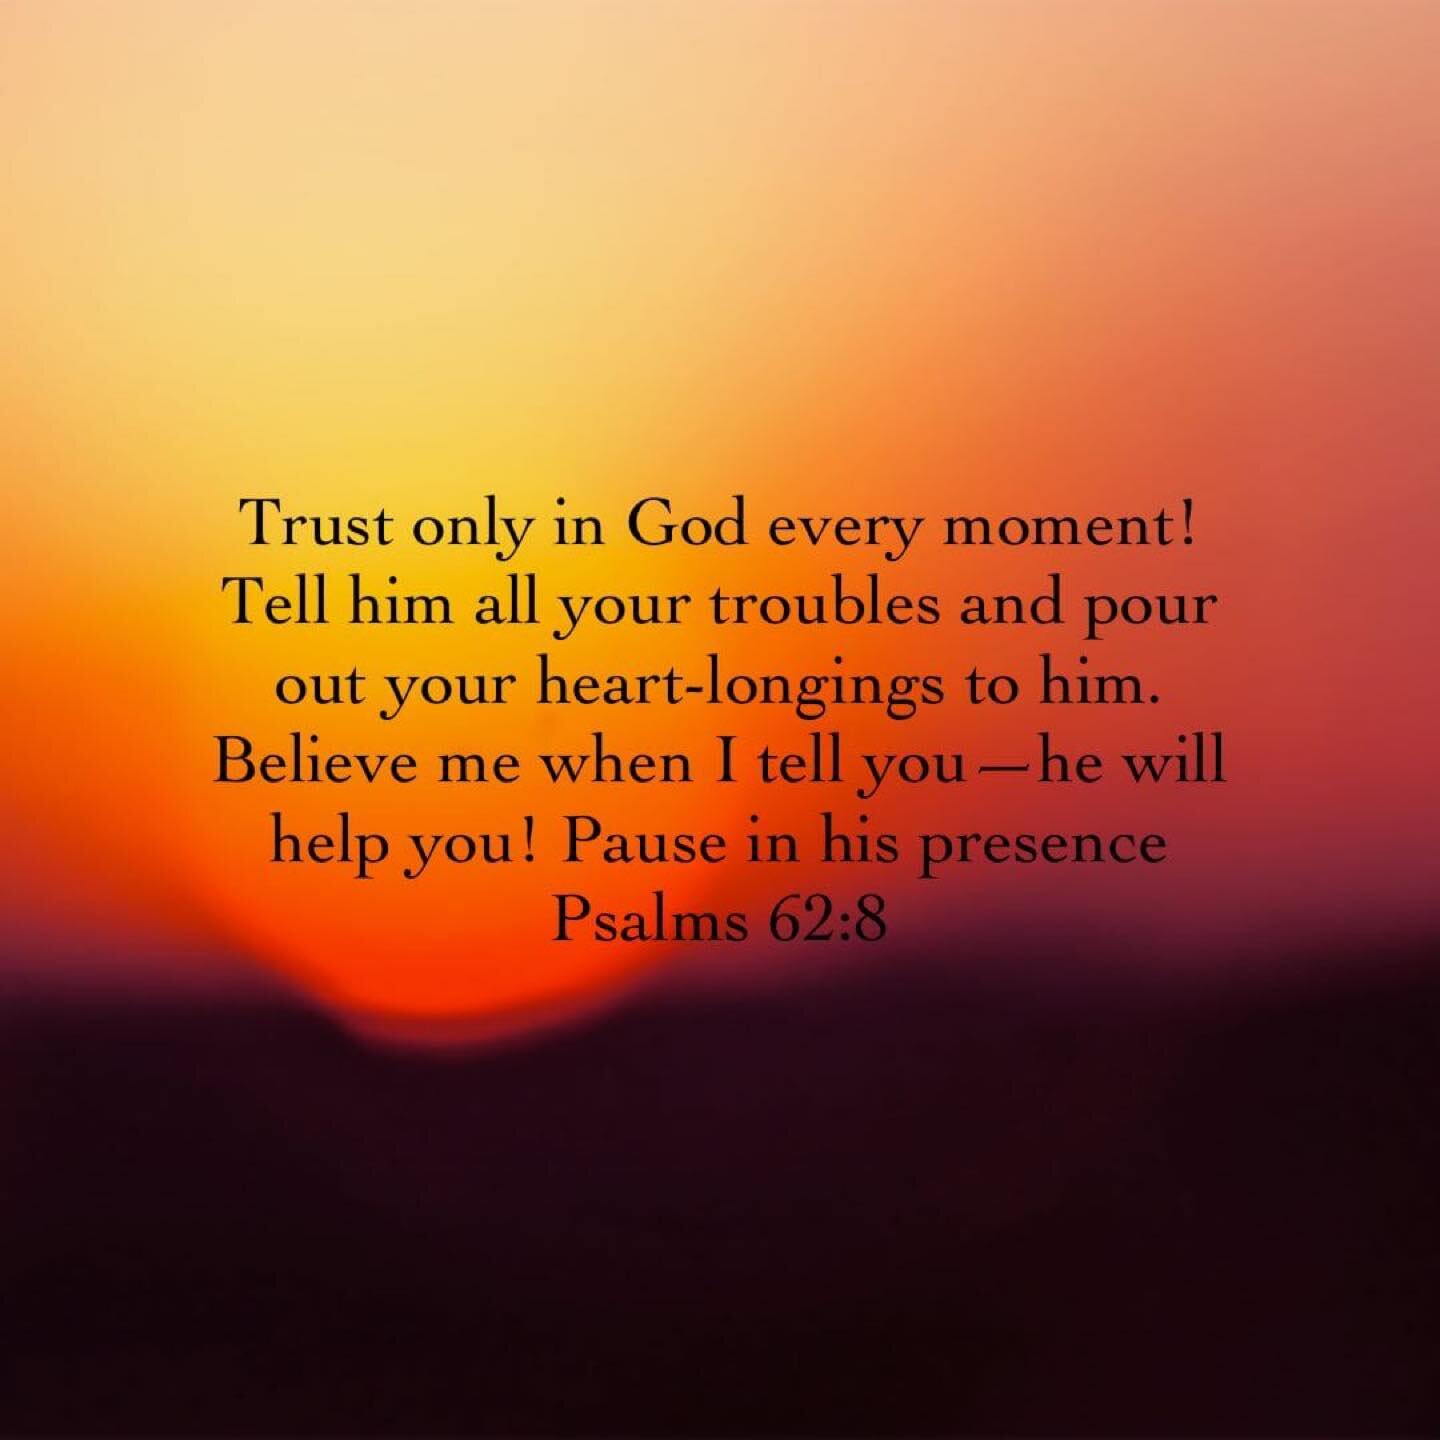 Prayer + Waiting = Trust
When we place our trust in God above all else, He will come through. God is forever faithful!